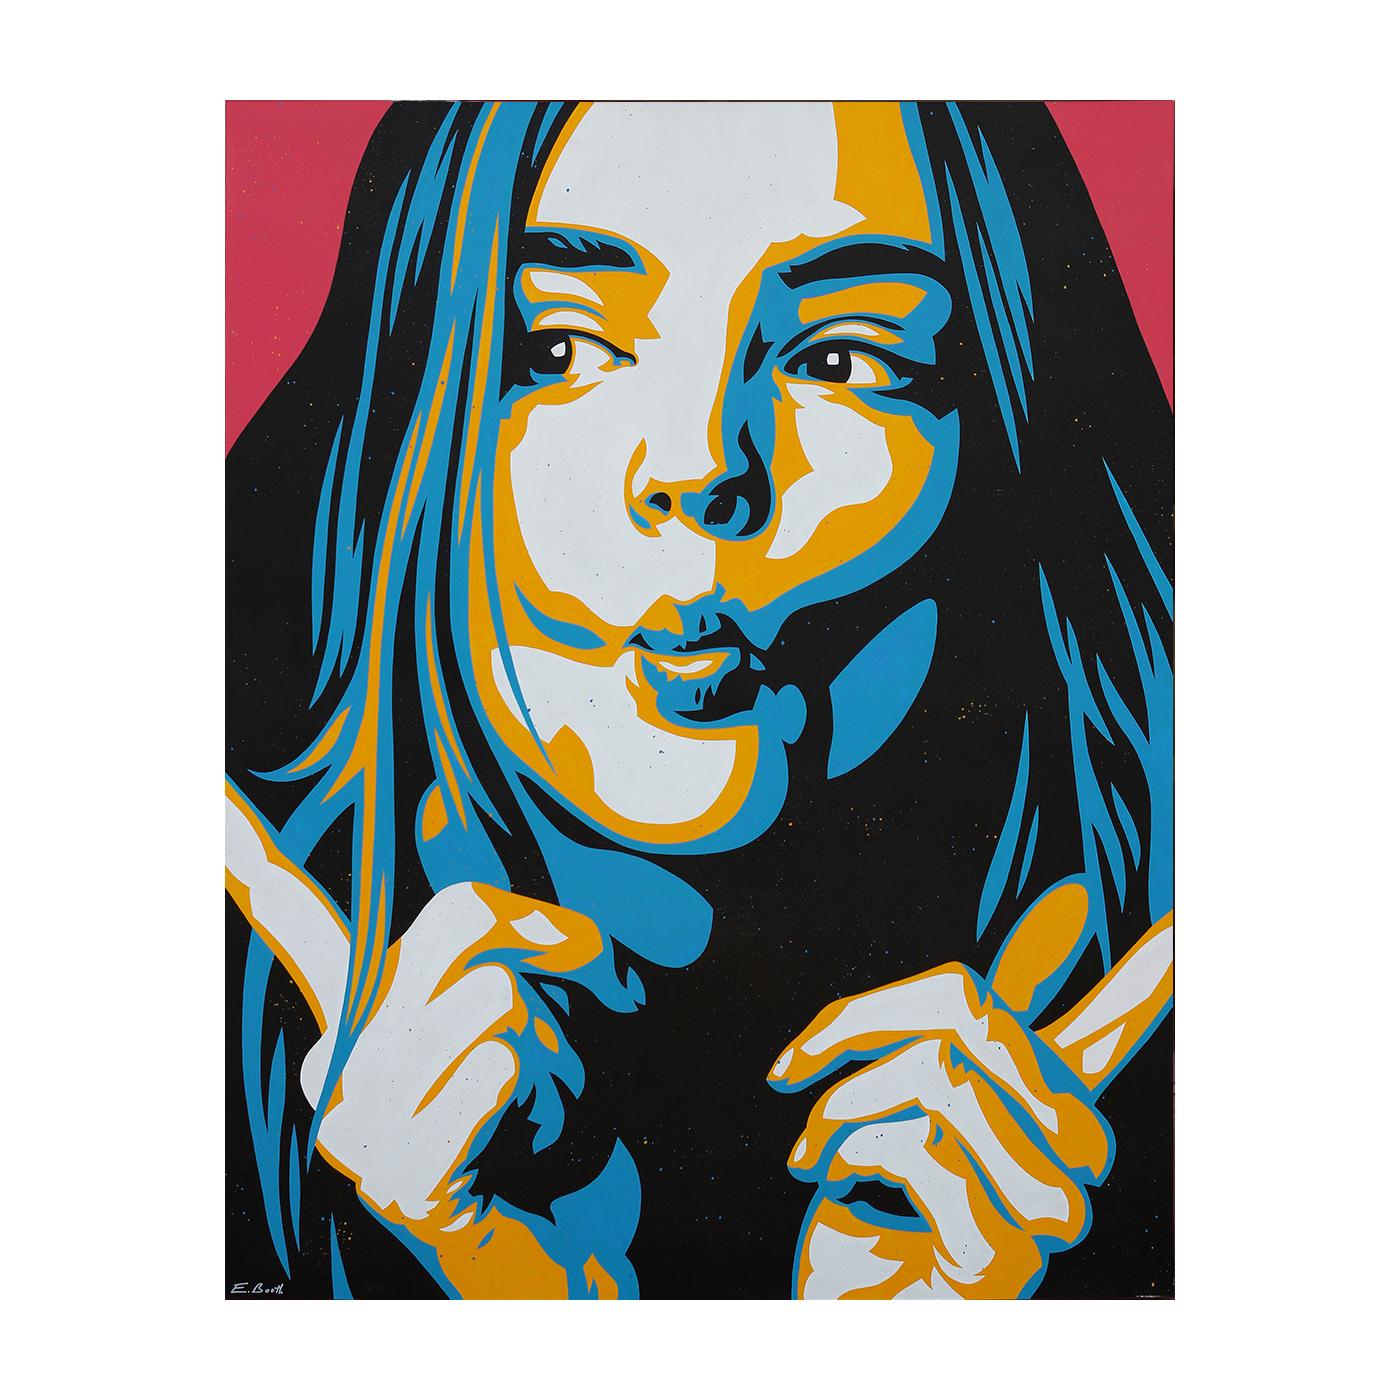 “Kickin’ Around” Blue, Yellow, and Pink Toned Abstract Vectorized Woman Portrait - Painting by Ed Booth